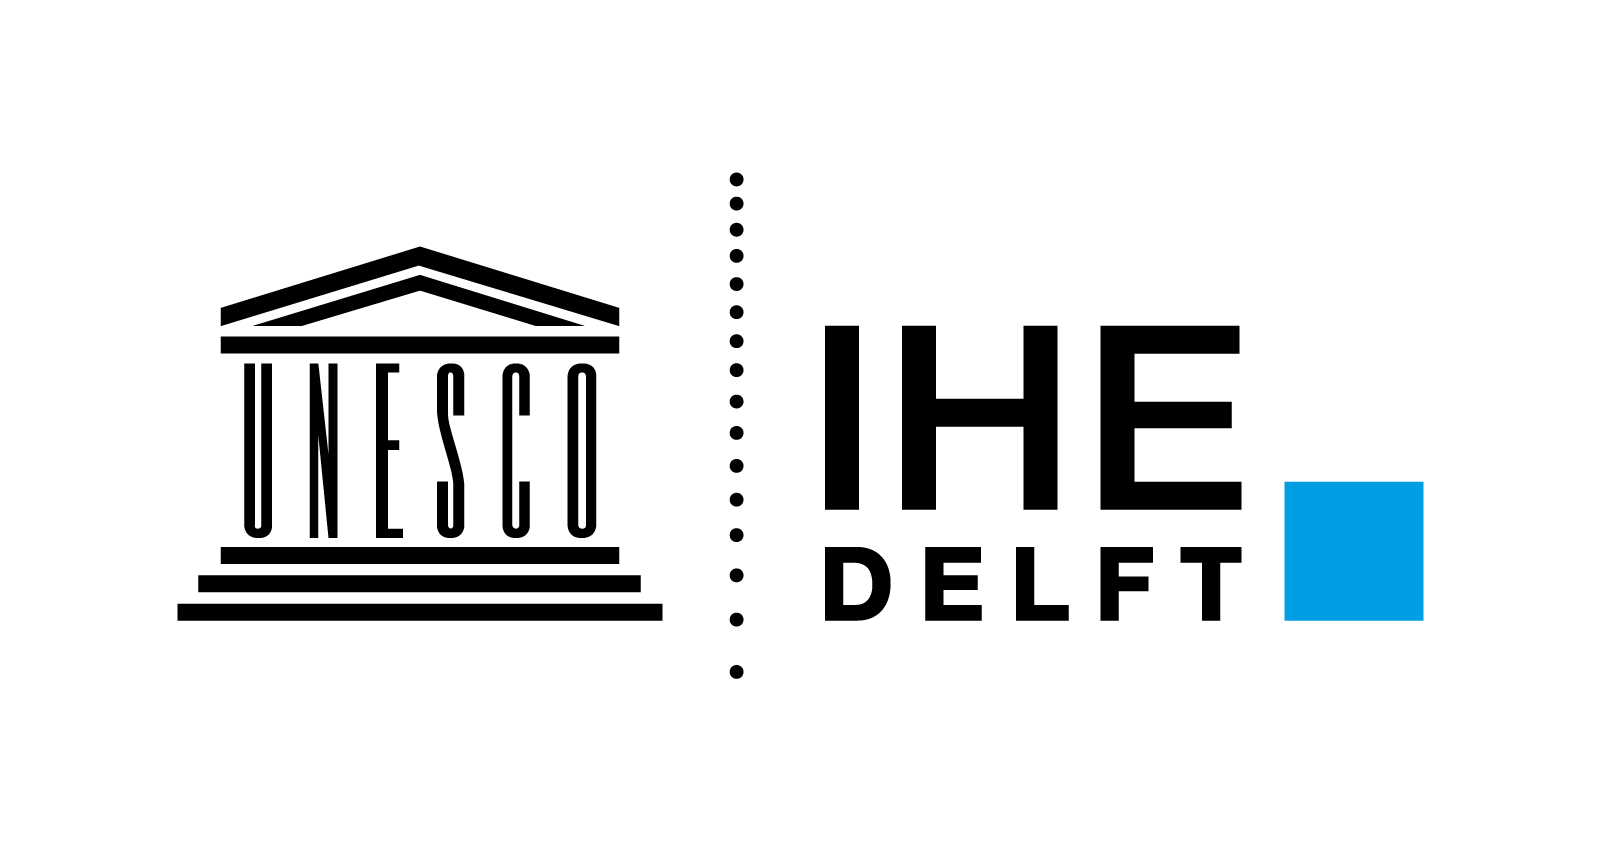 IHE Delft is a present partner